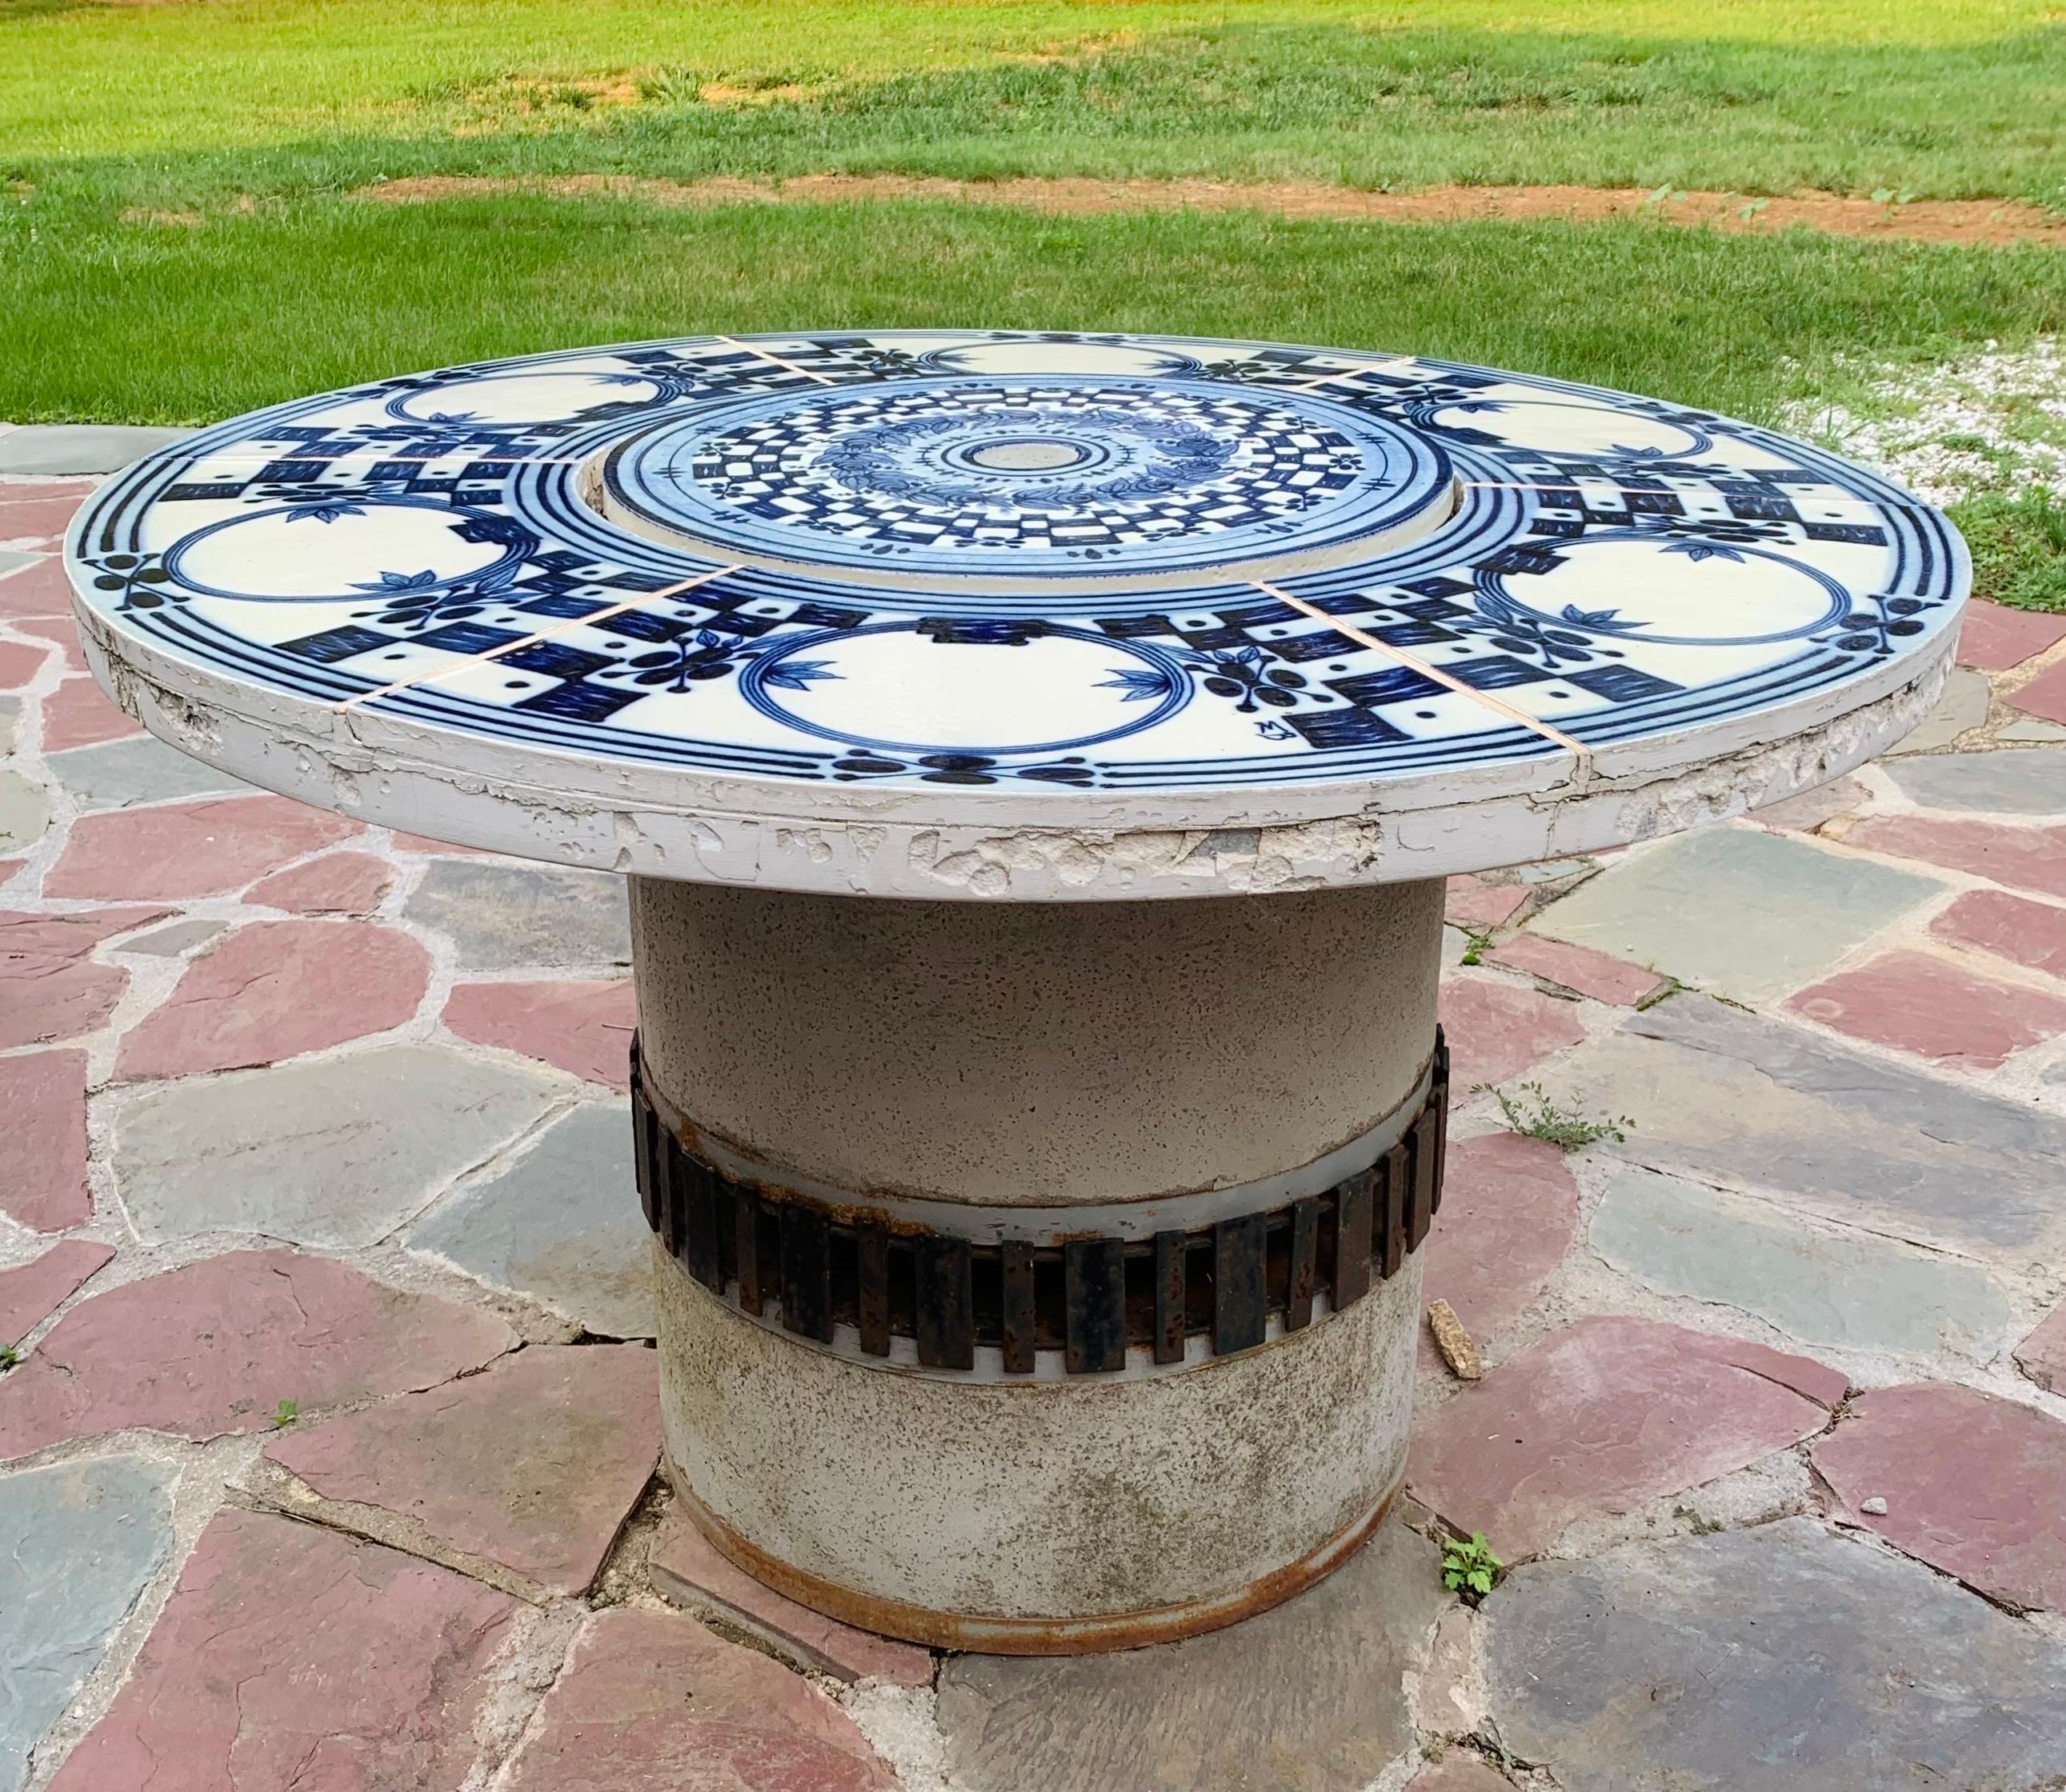 This is a large round outdoor Hibachi grilling table. Its top is paved with hand-painted blue and white faience tiles, and it has a cast concrete base.

The tiles were painted by artist Bjørn Wiinblad, an important Danish painter and